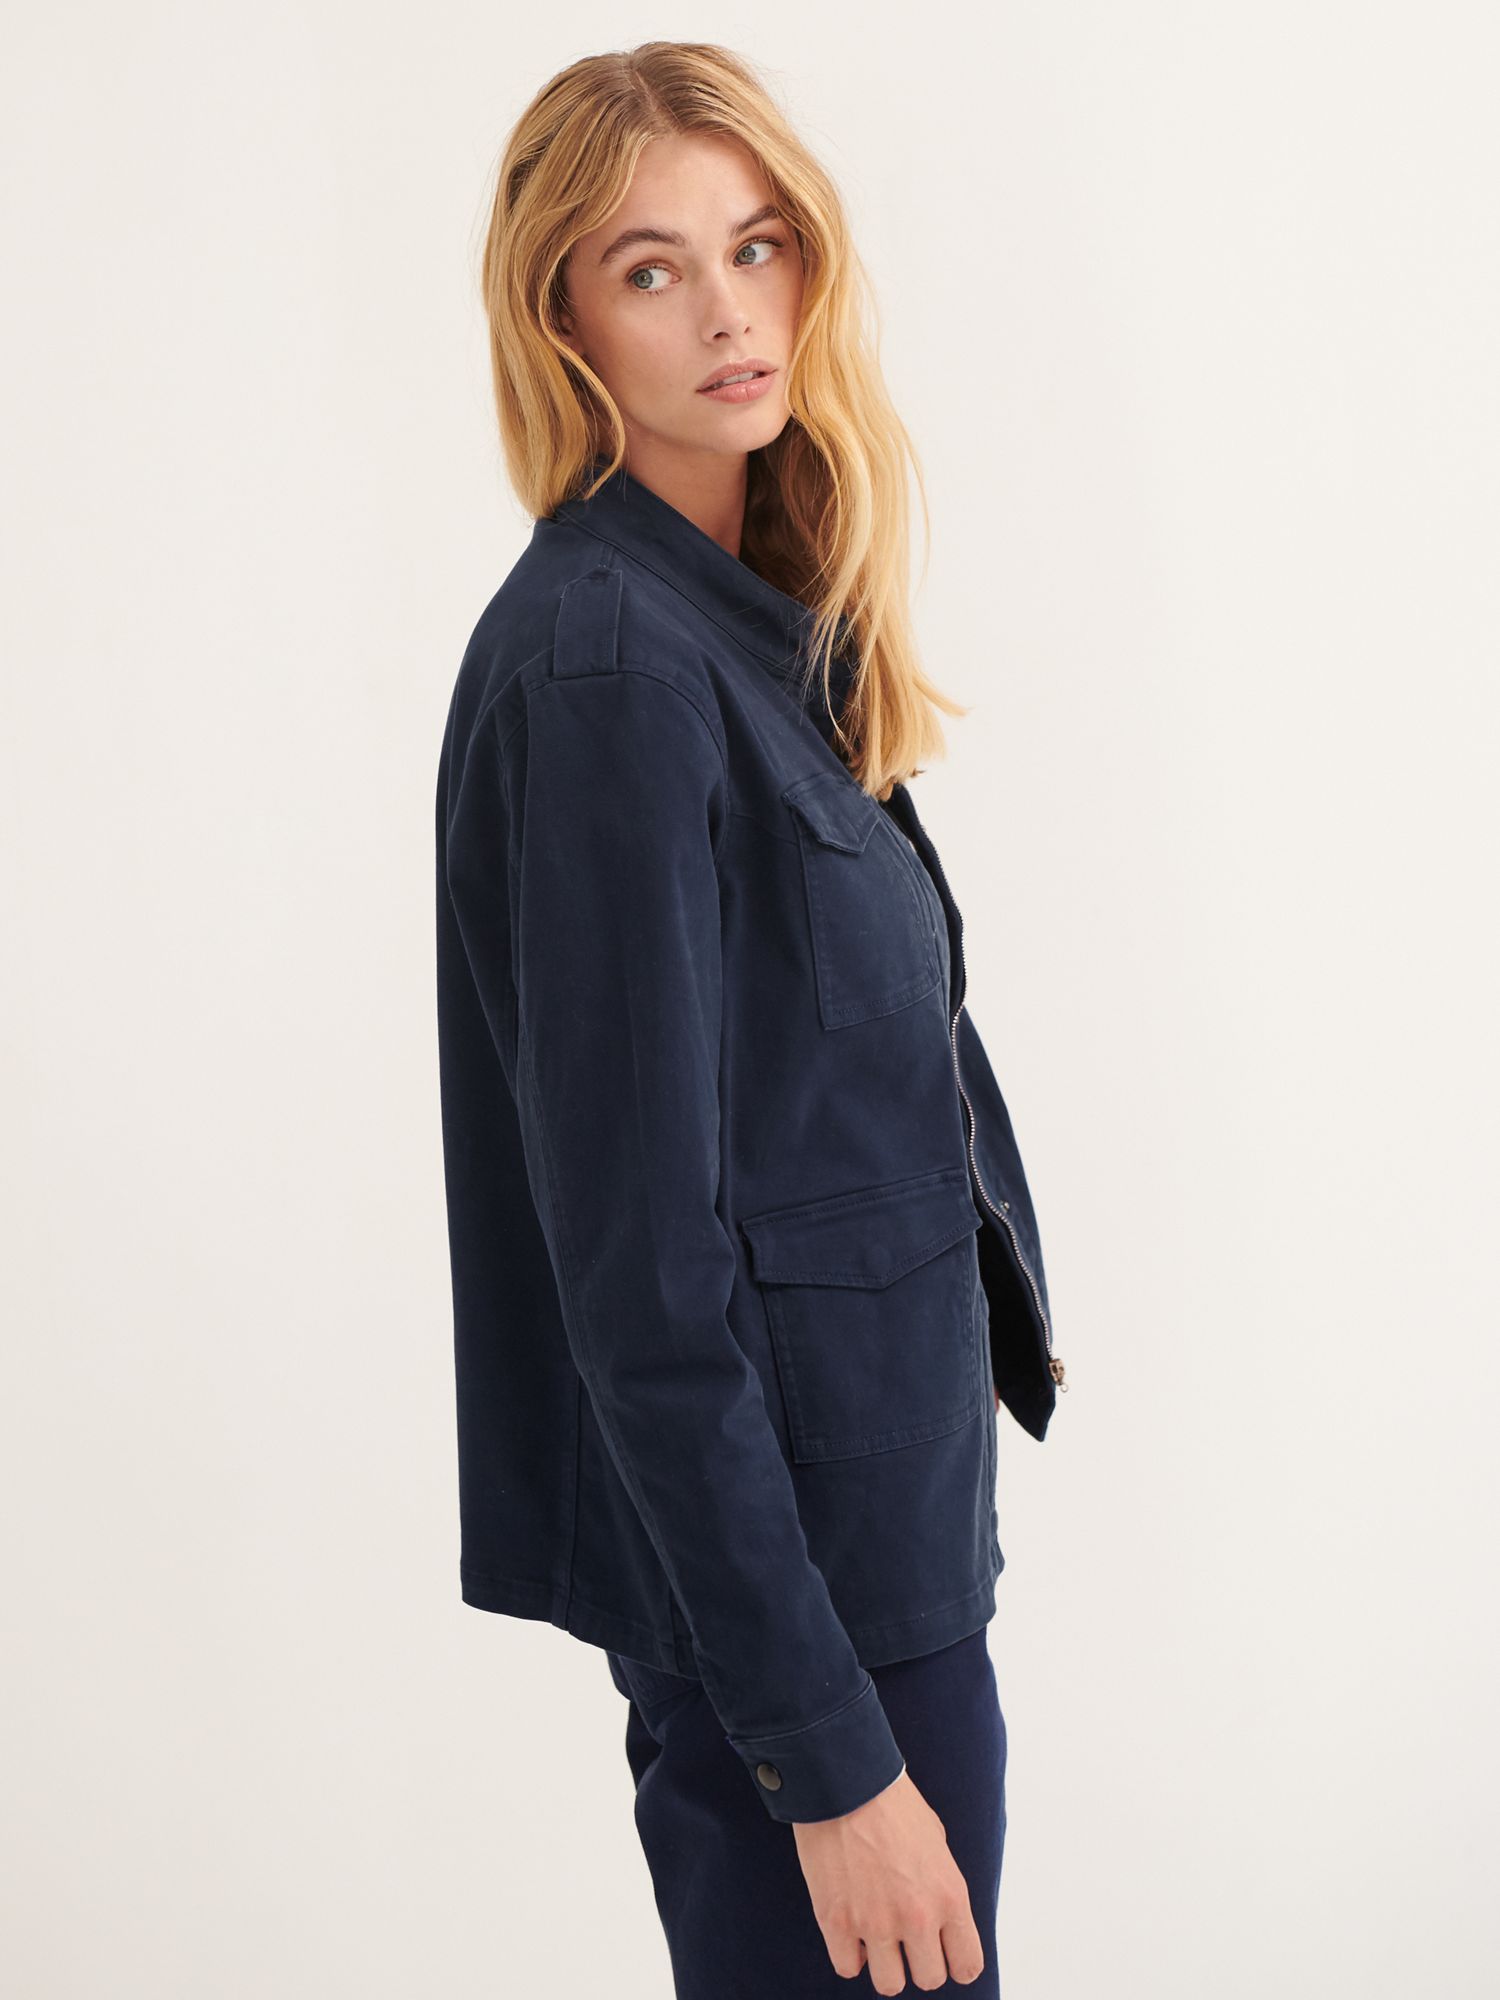 NRBY Monica Cotton Utility Jacket, Navy at John Lewis & Partners